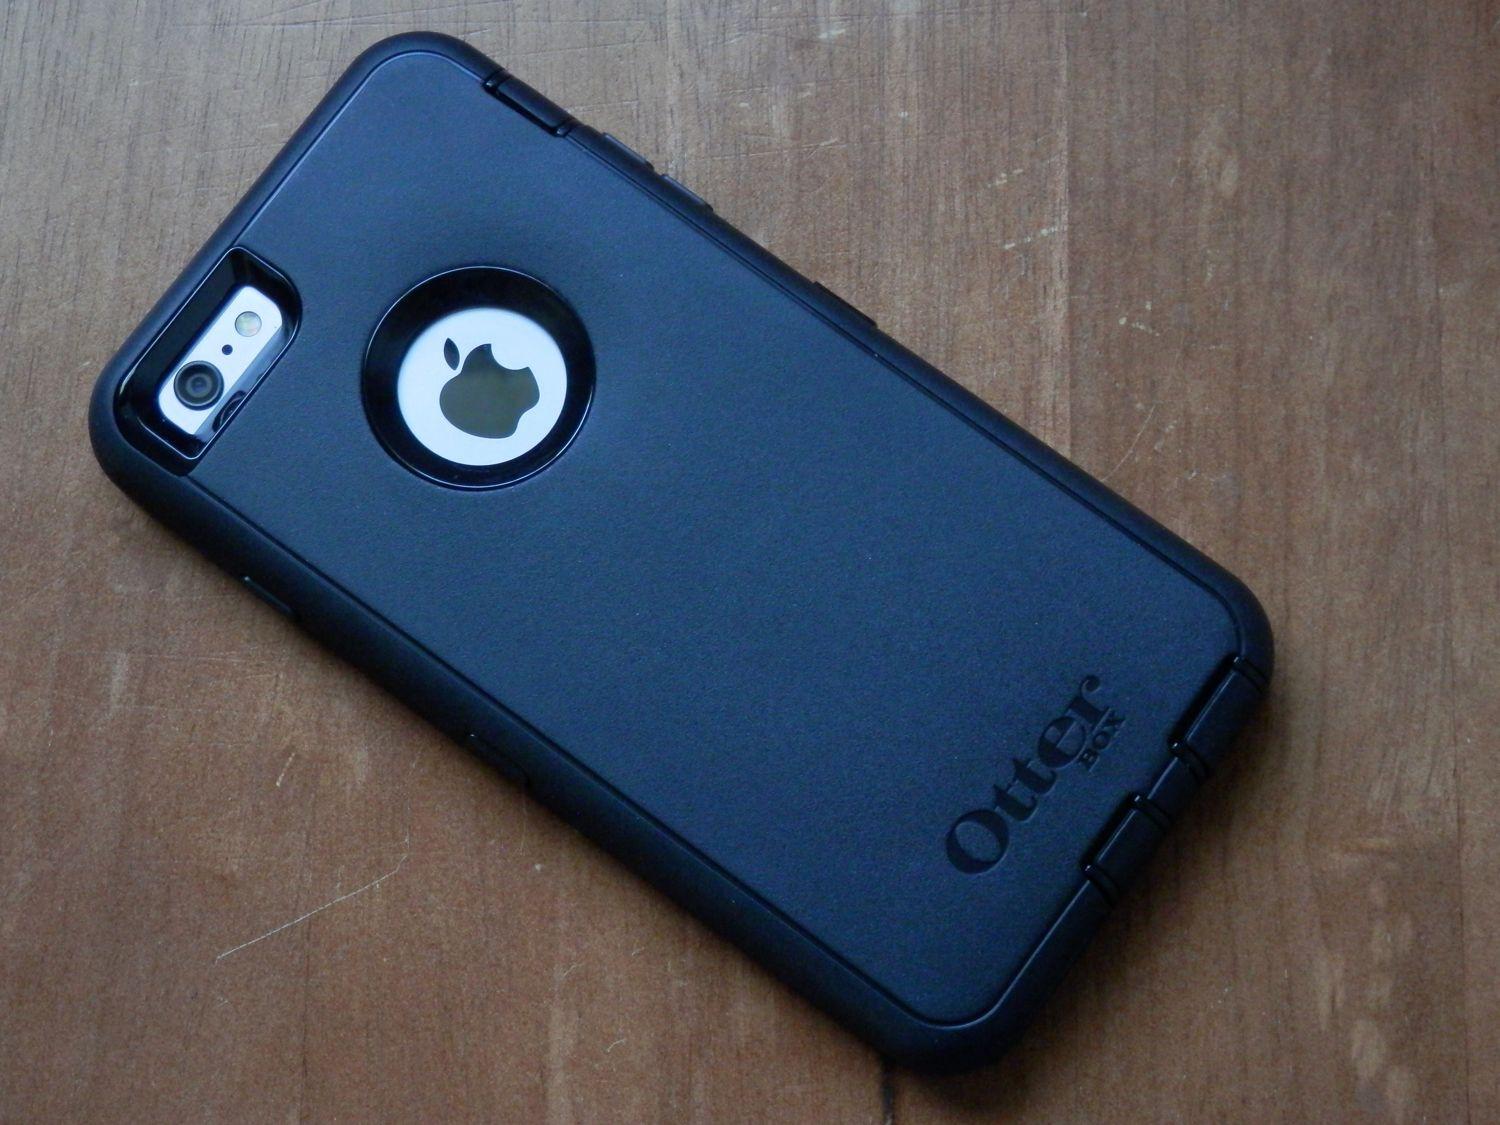 OtterBox Logo - OtterBox iPhone cases shootout: which one should you get?